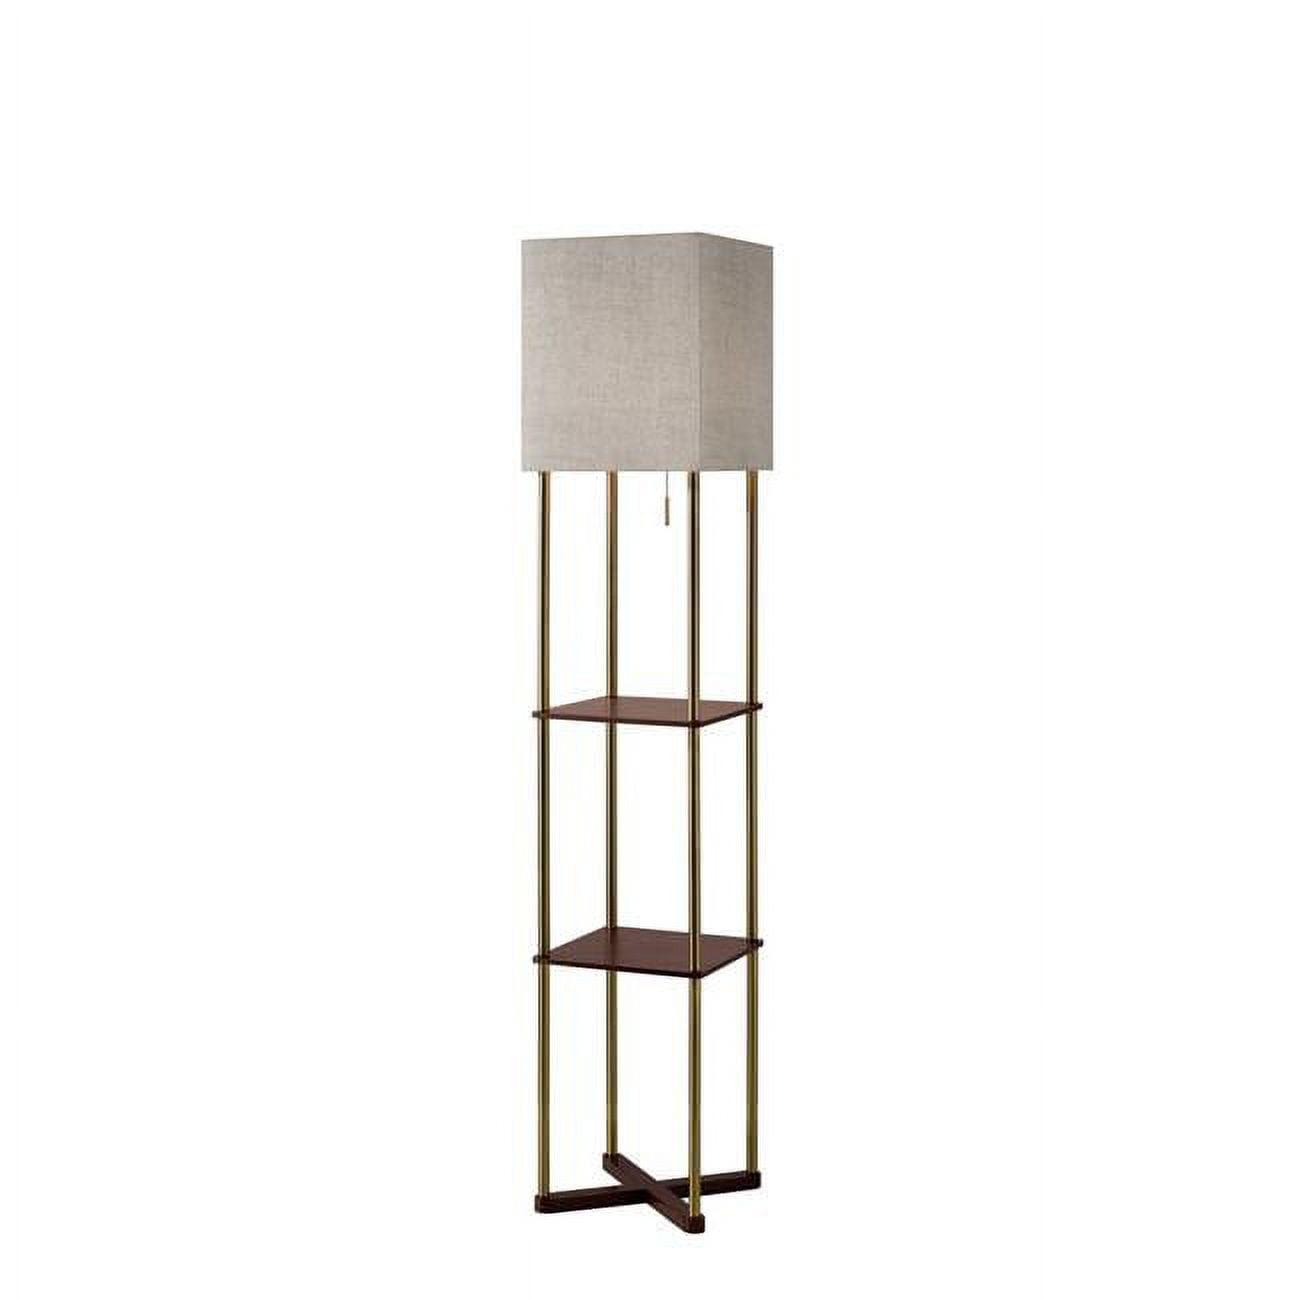 Antique Brass and Walnut Wood Shelf Floor Lamp with USB Ports